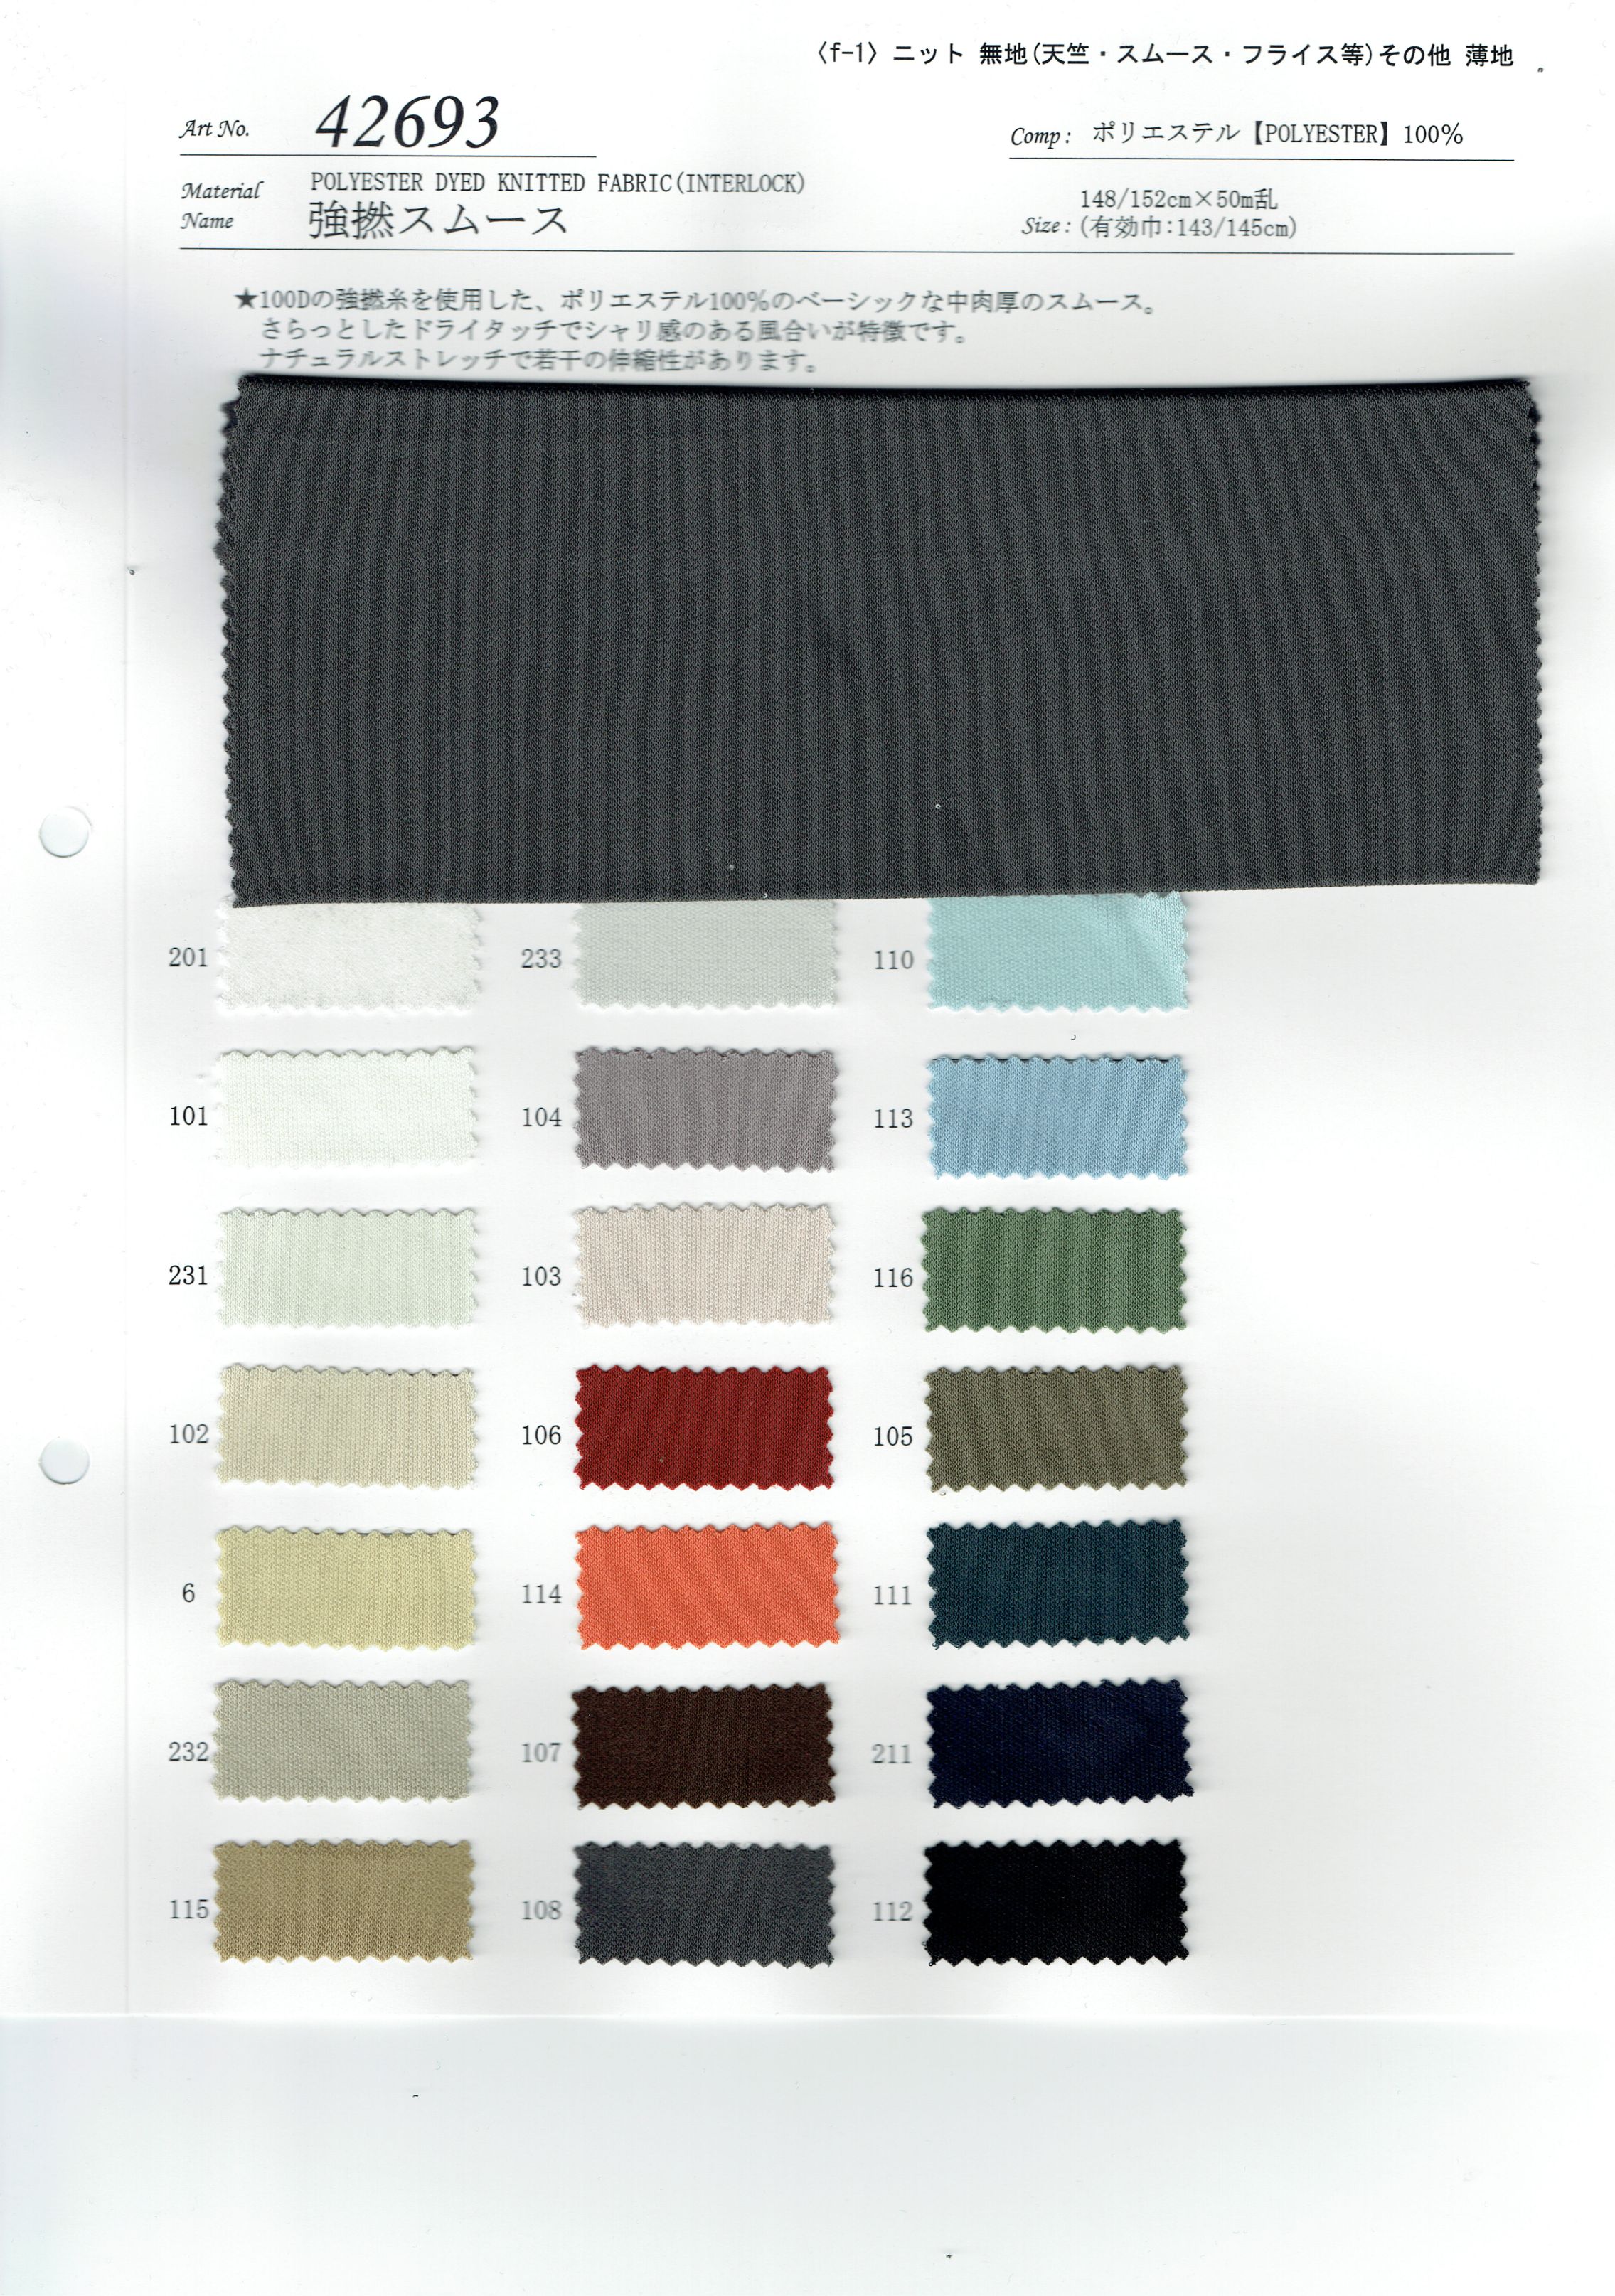 View POLYESTER100 DYED KNITTED FABRIC[INTERLOCK] DYED KNITTED FABRIC[INTERLOCK]